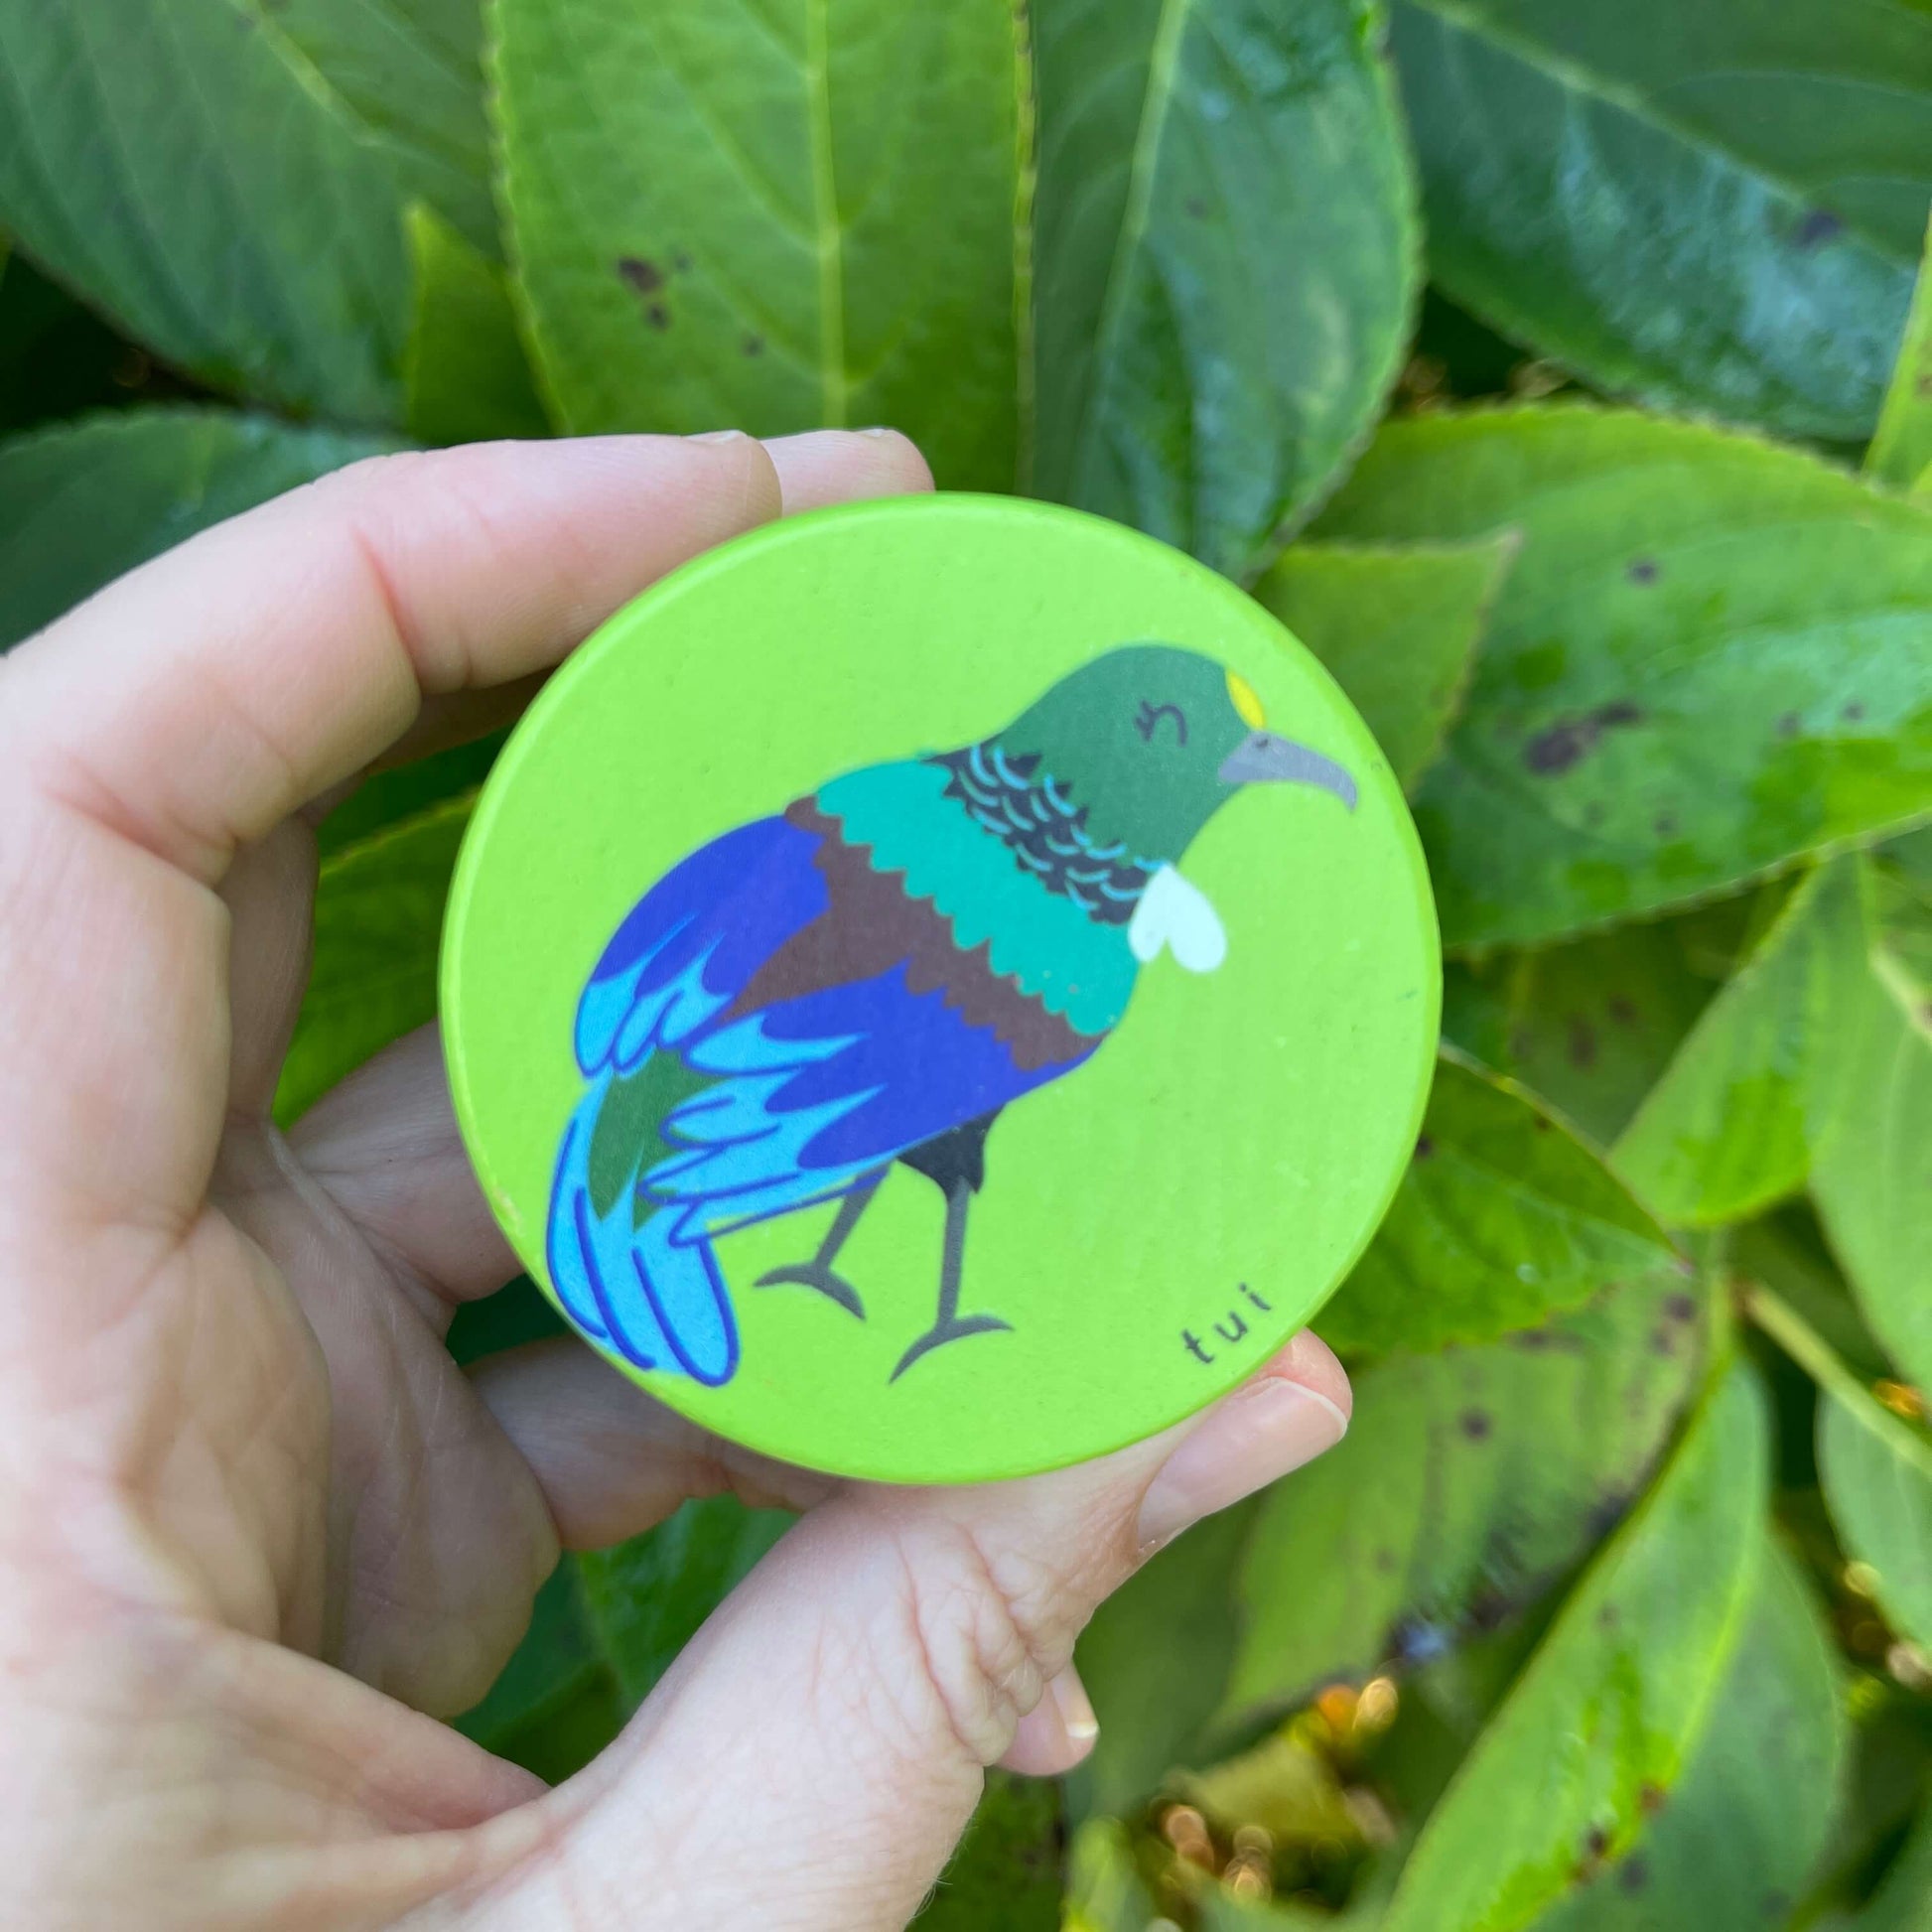 Womens hand holding a Bright green wooden yoyo with a Tui bird painted on it